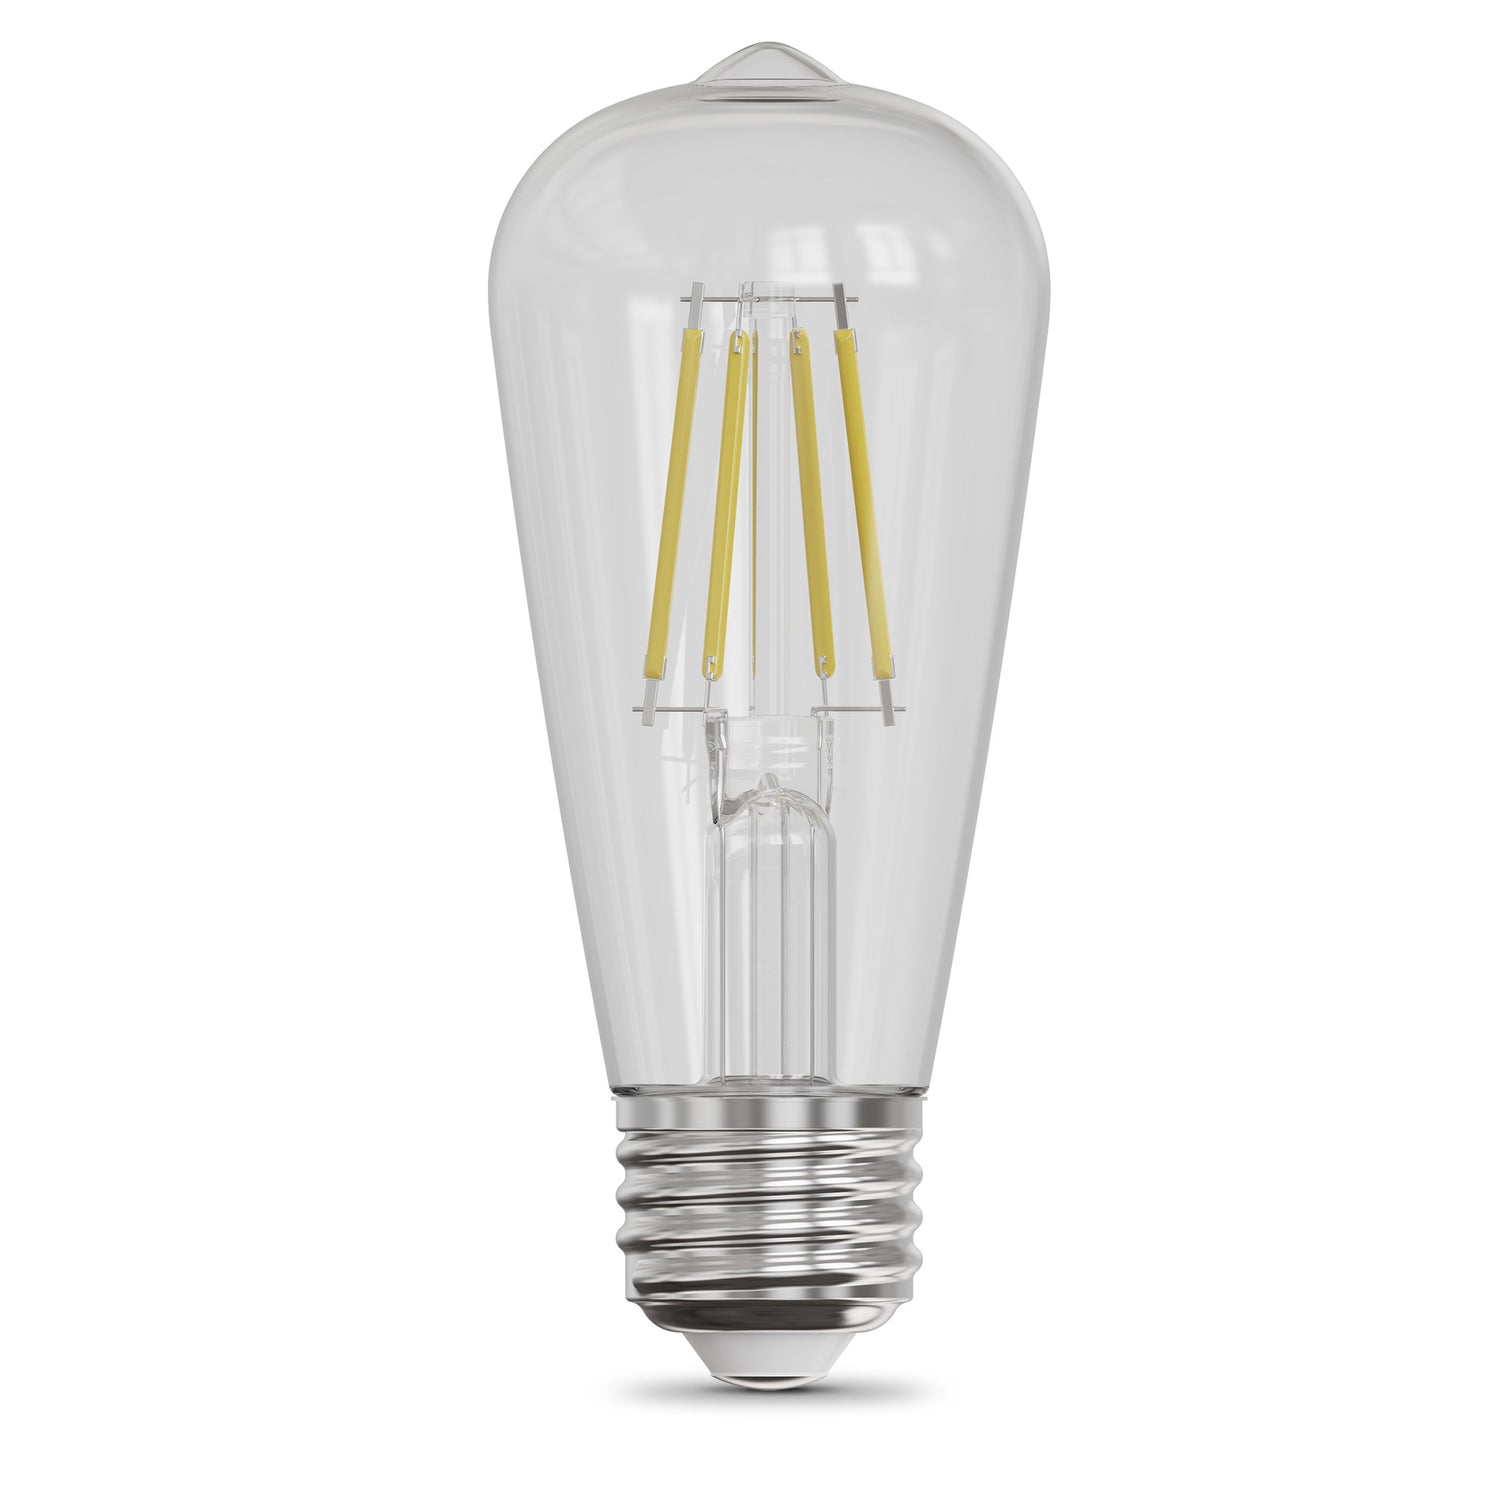 5.5W (60W Replacement) ST15 E26 Dimmable Straight Filament Clear Glass Vintage Edison LED Light Bulb, Soft White (2-Pack)